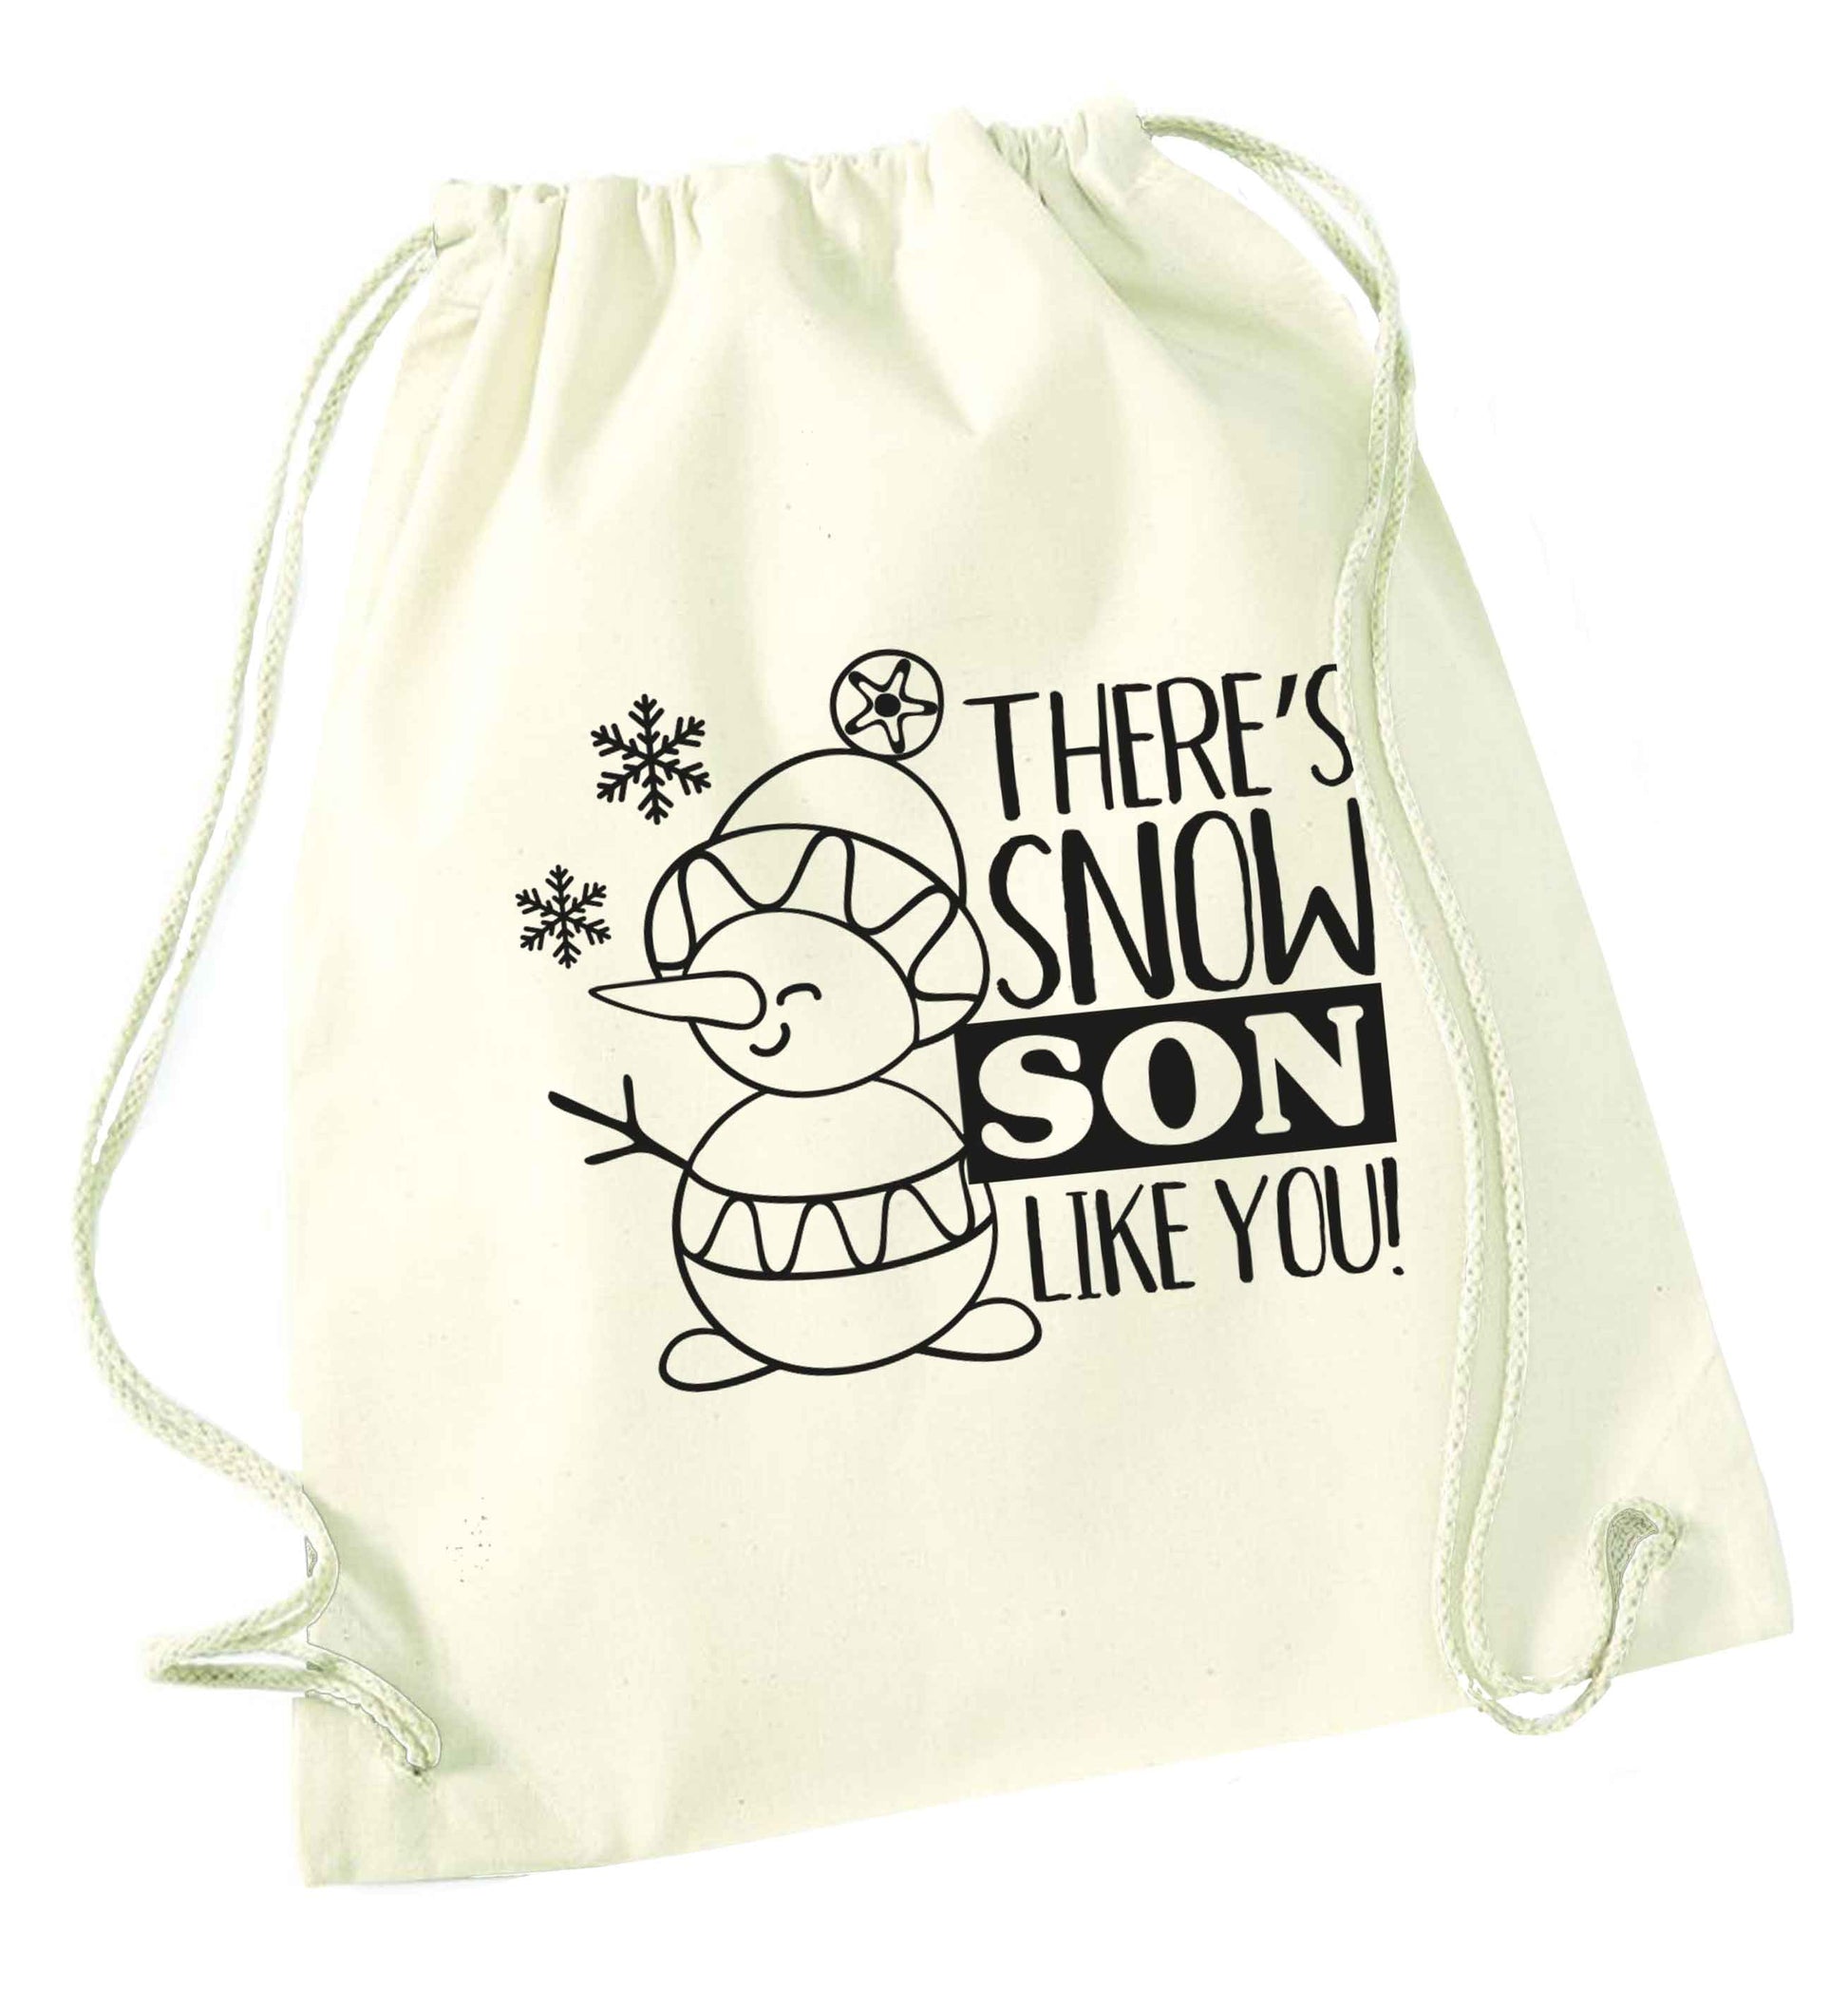 There's snow son like you natural drawstring bag